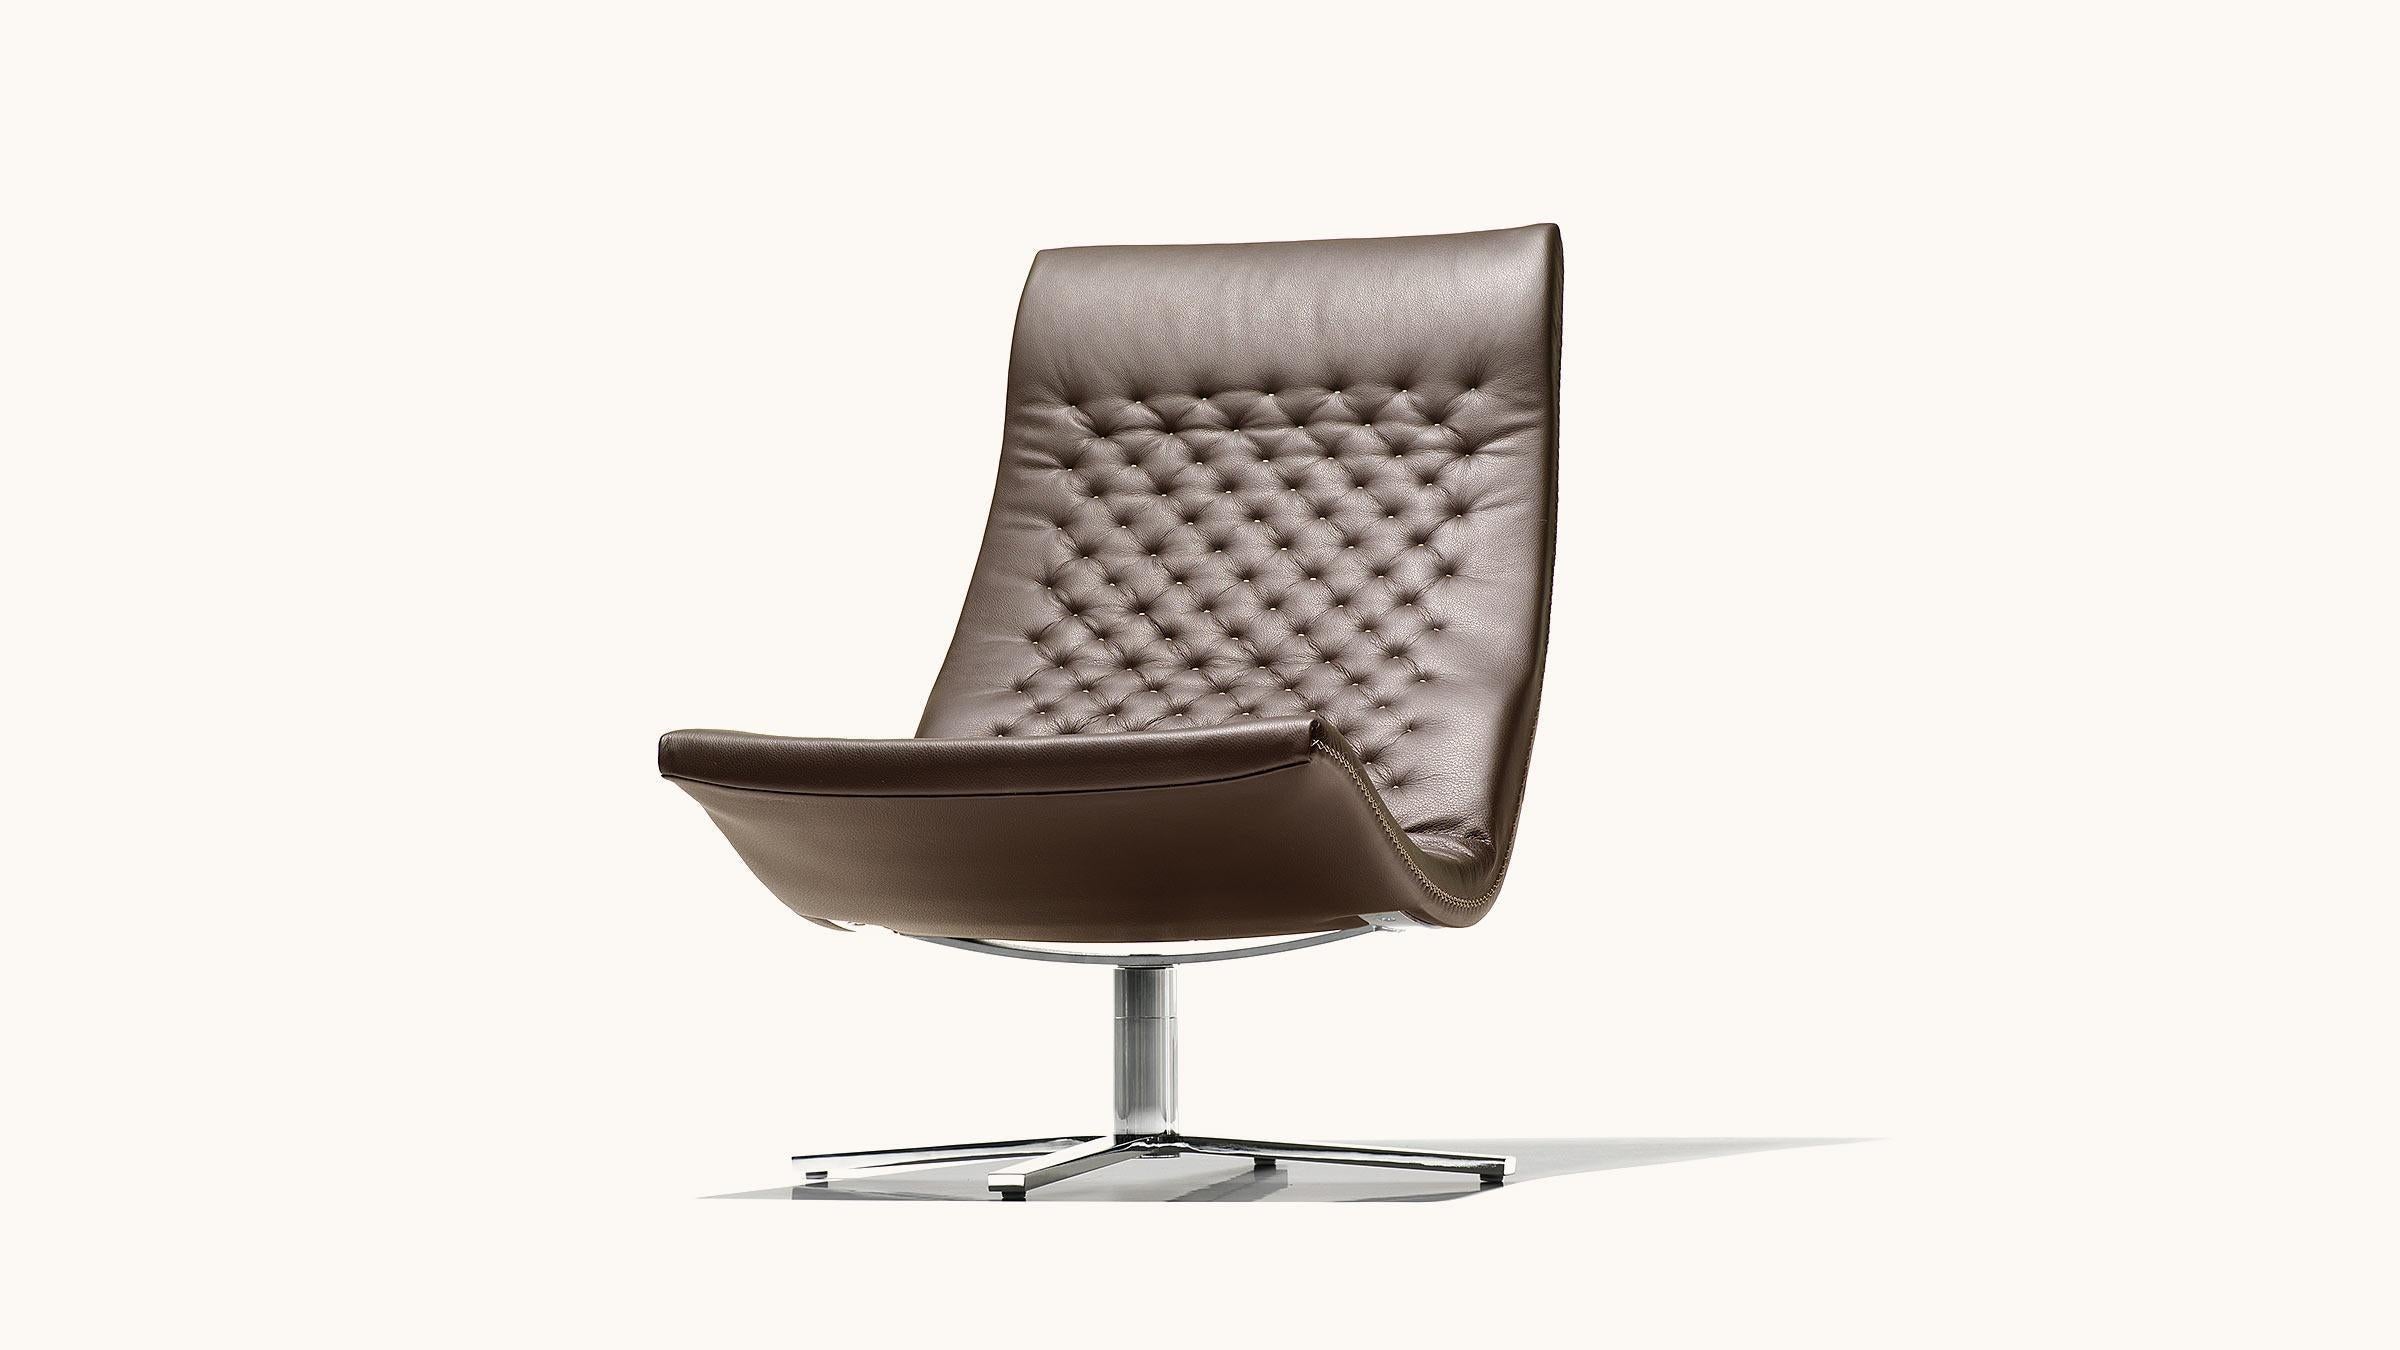 The DS-51 swivel armchair helped establish De Sede’s worldwide reputation for Swiss hand craftsmanship and production of the highest quality. Optionally available with or without armrests, this design Classic guarantees high comfort and convenience